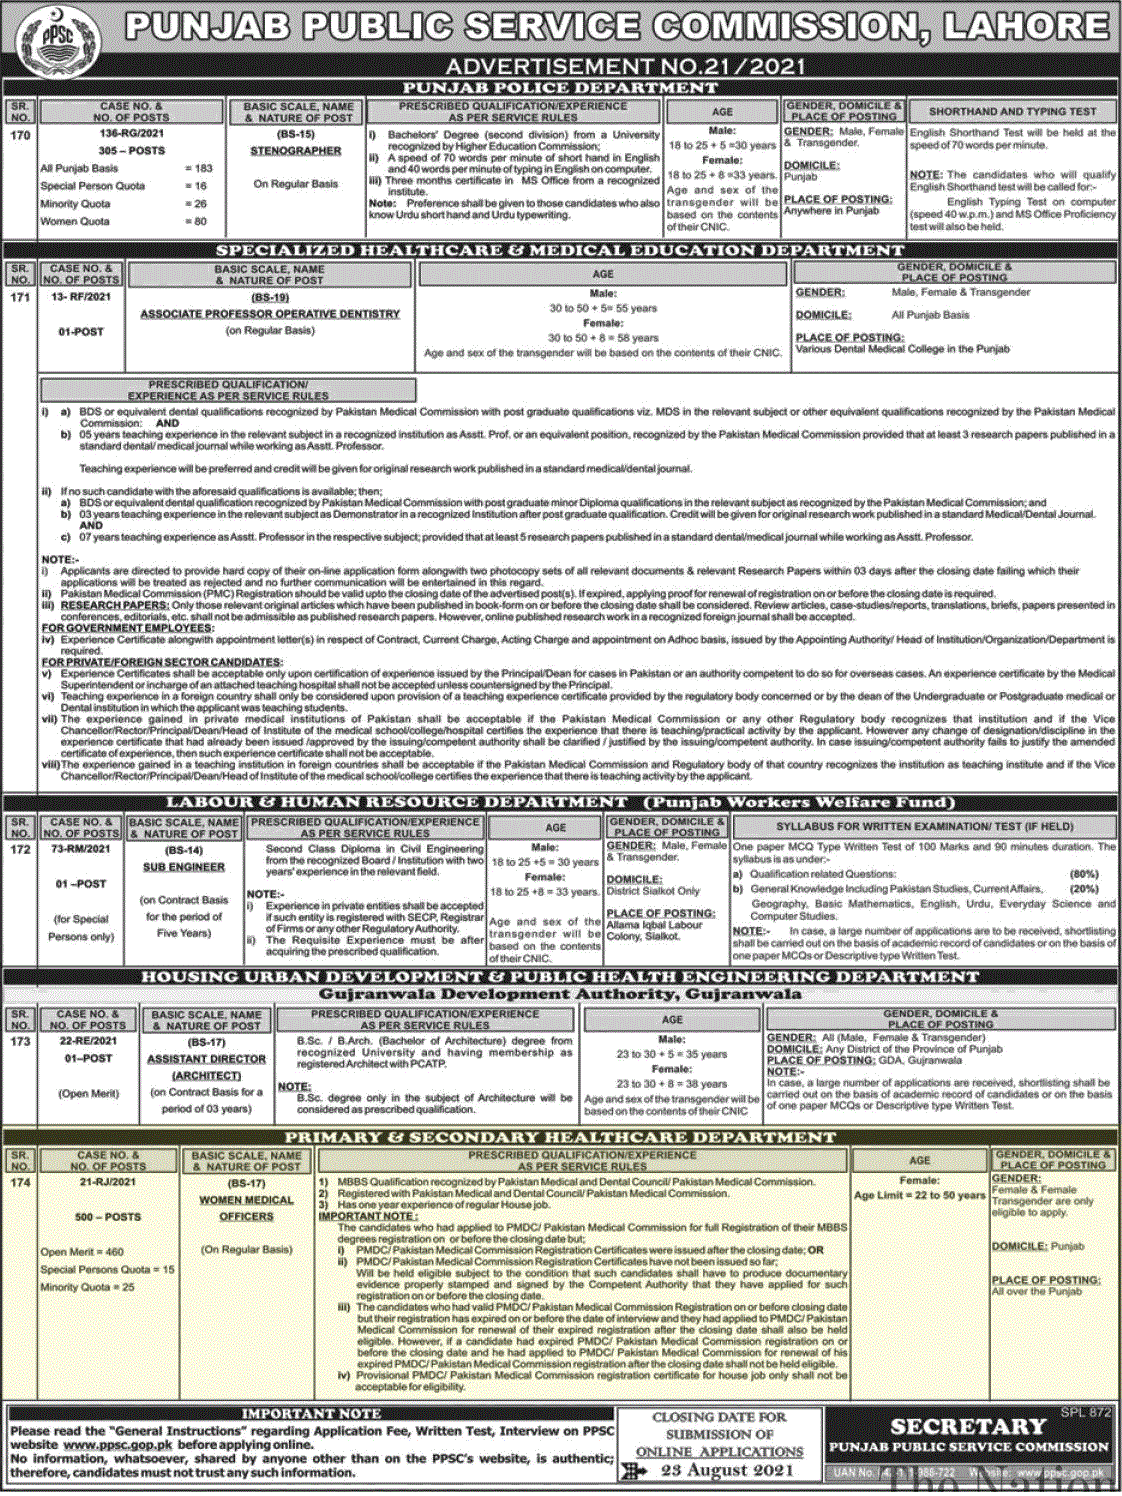 Women Medical Officer Jobs in Primary and Secondary Healthcare Department Punjab